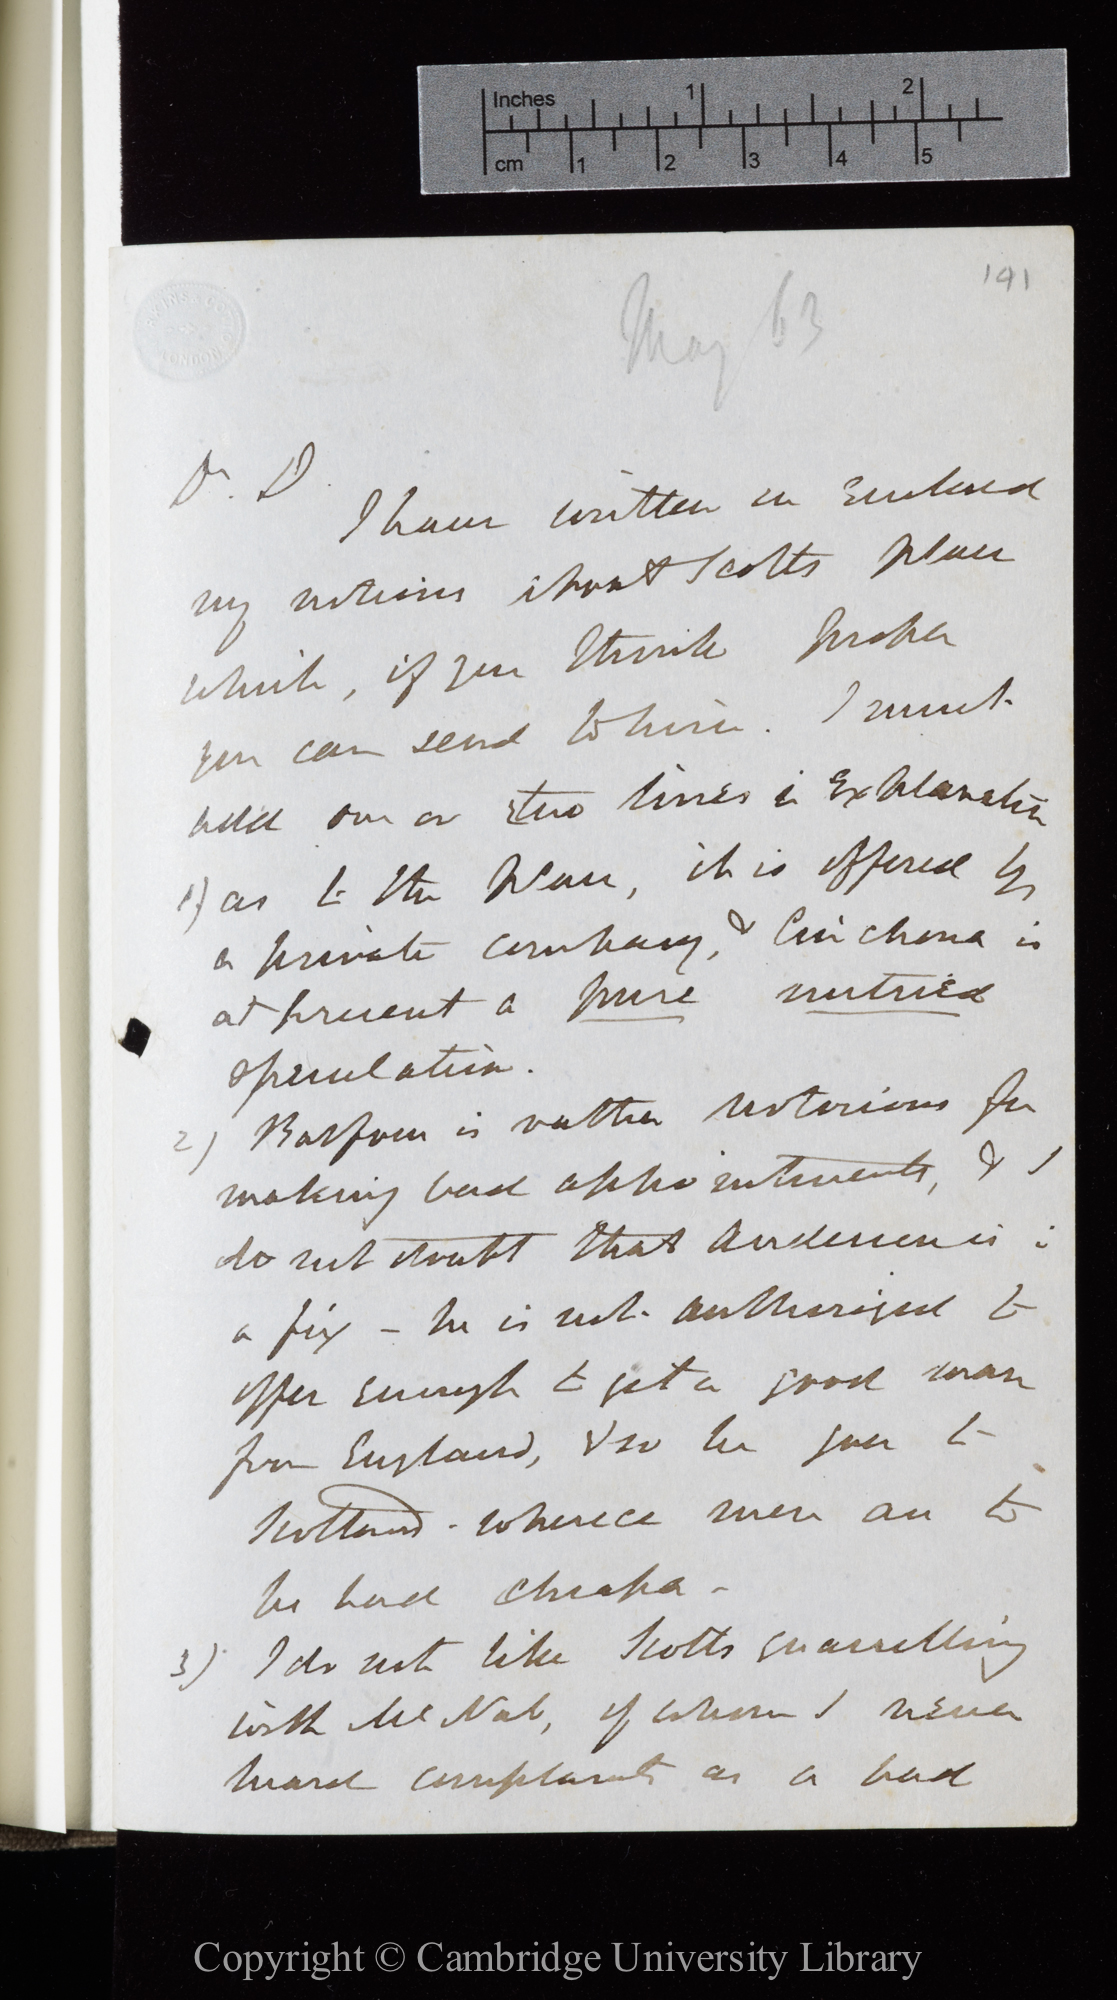 Letter from J. D. Hooker to C. R. Darwin   [23-7 May 1863]